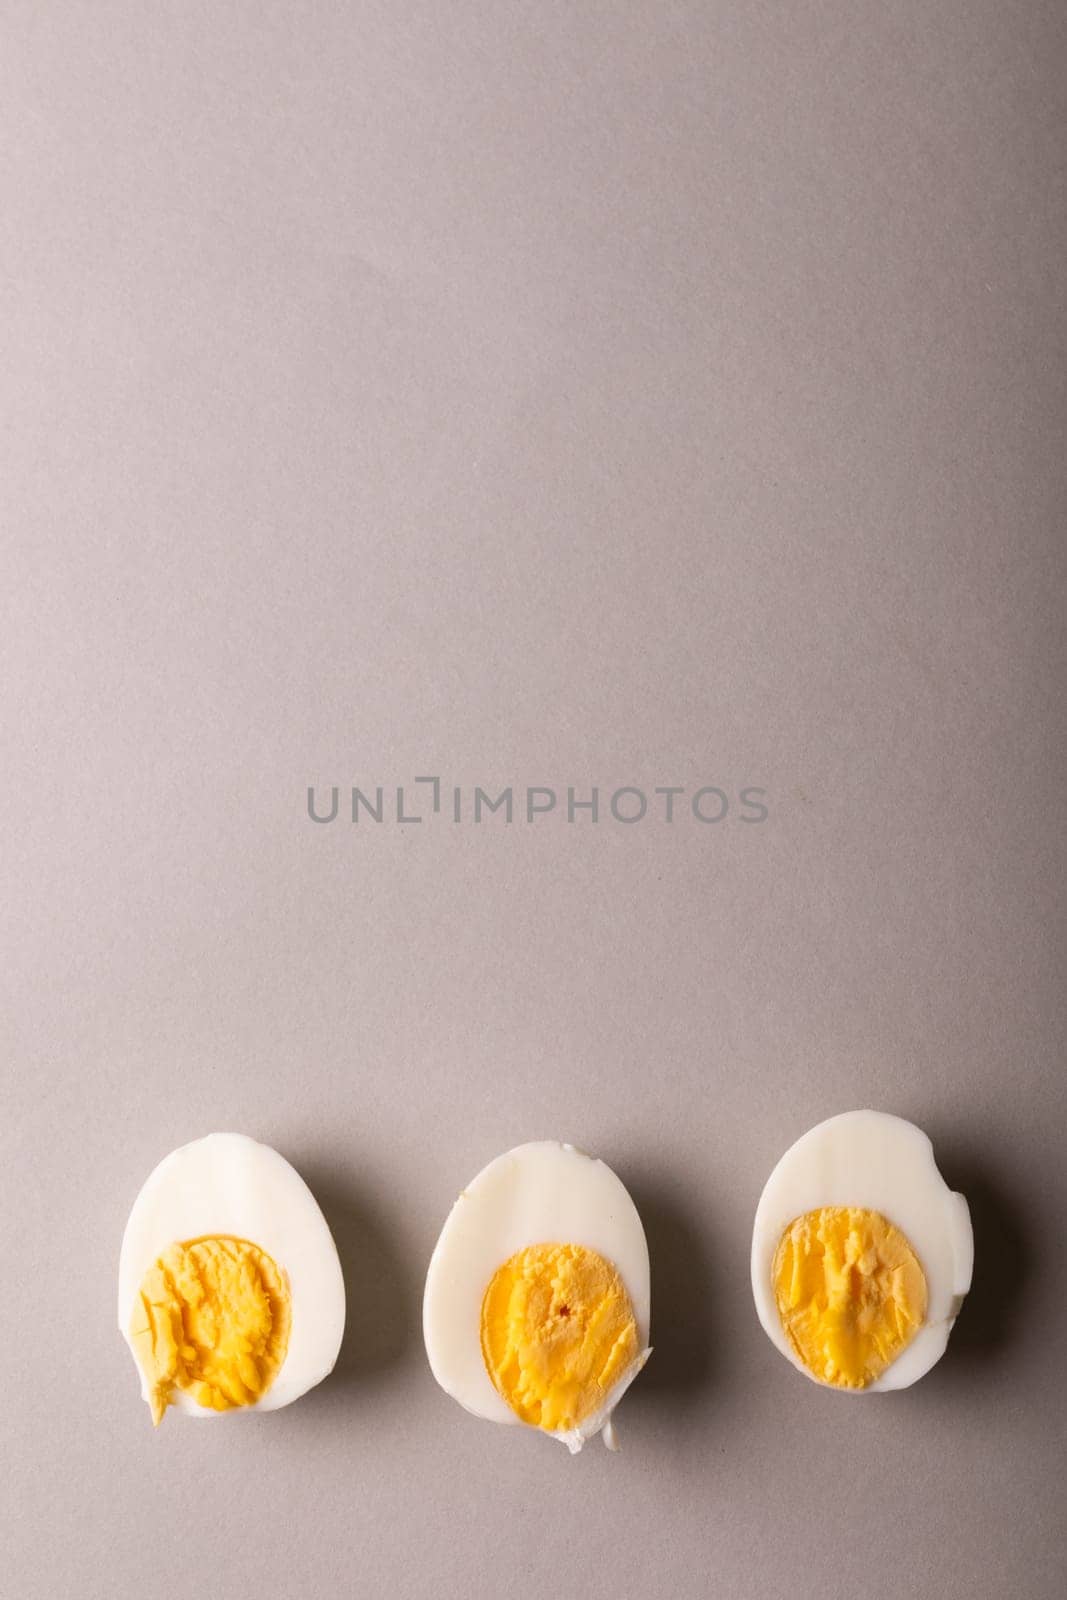 Overhead view of copy space with fresh boiled white egg halves against gray background by Wavebreakmedia